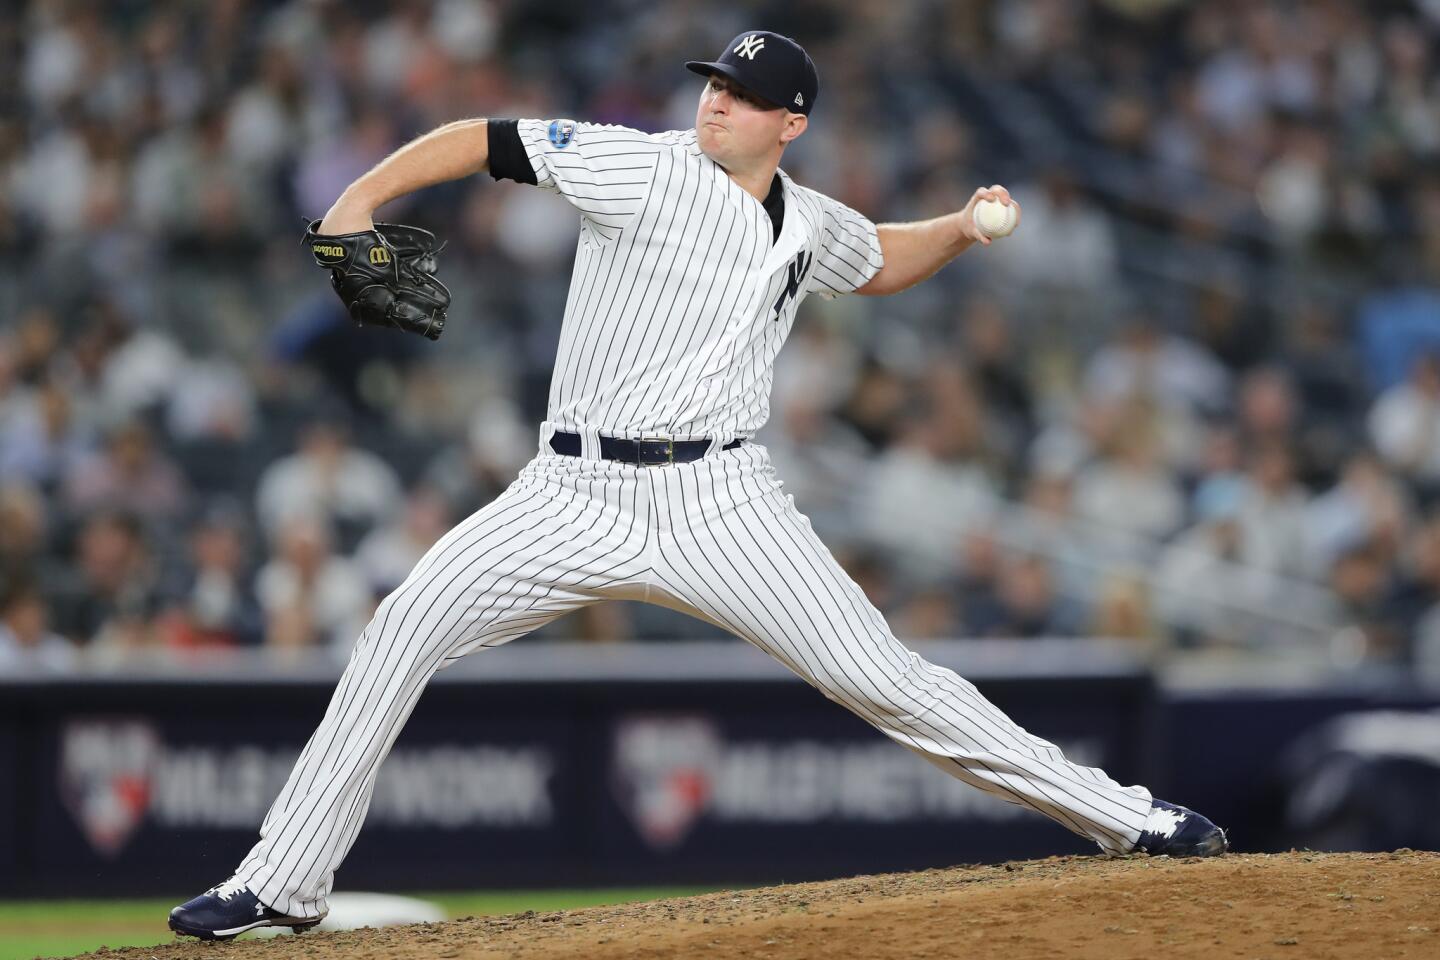 NEW YORK, NEW YORK - OCTOBER 03: Zach Britton #53 of the New York Yankees throws a pitch against the Oakland Athletics during the eighth inning in the American League Wild Card Game at Yankee Stadium on October 03, 2018 in the Bronx borough of New York City. (Photo by Elsa/Getty Images) ** OUTS - ELSENT, FPG, CM - OUTS * NM, PH, VA if sourced by CT, LA or MoD **